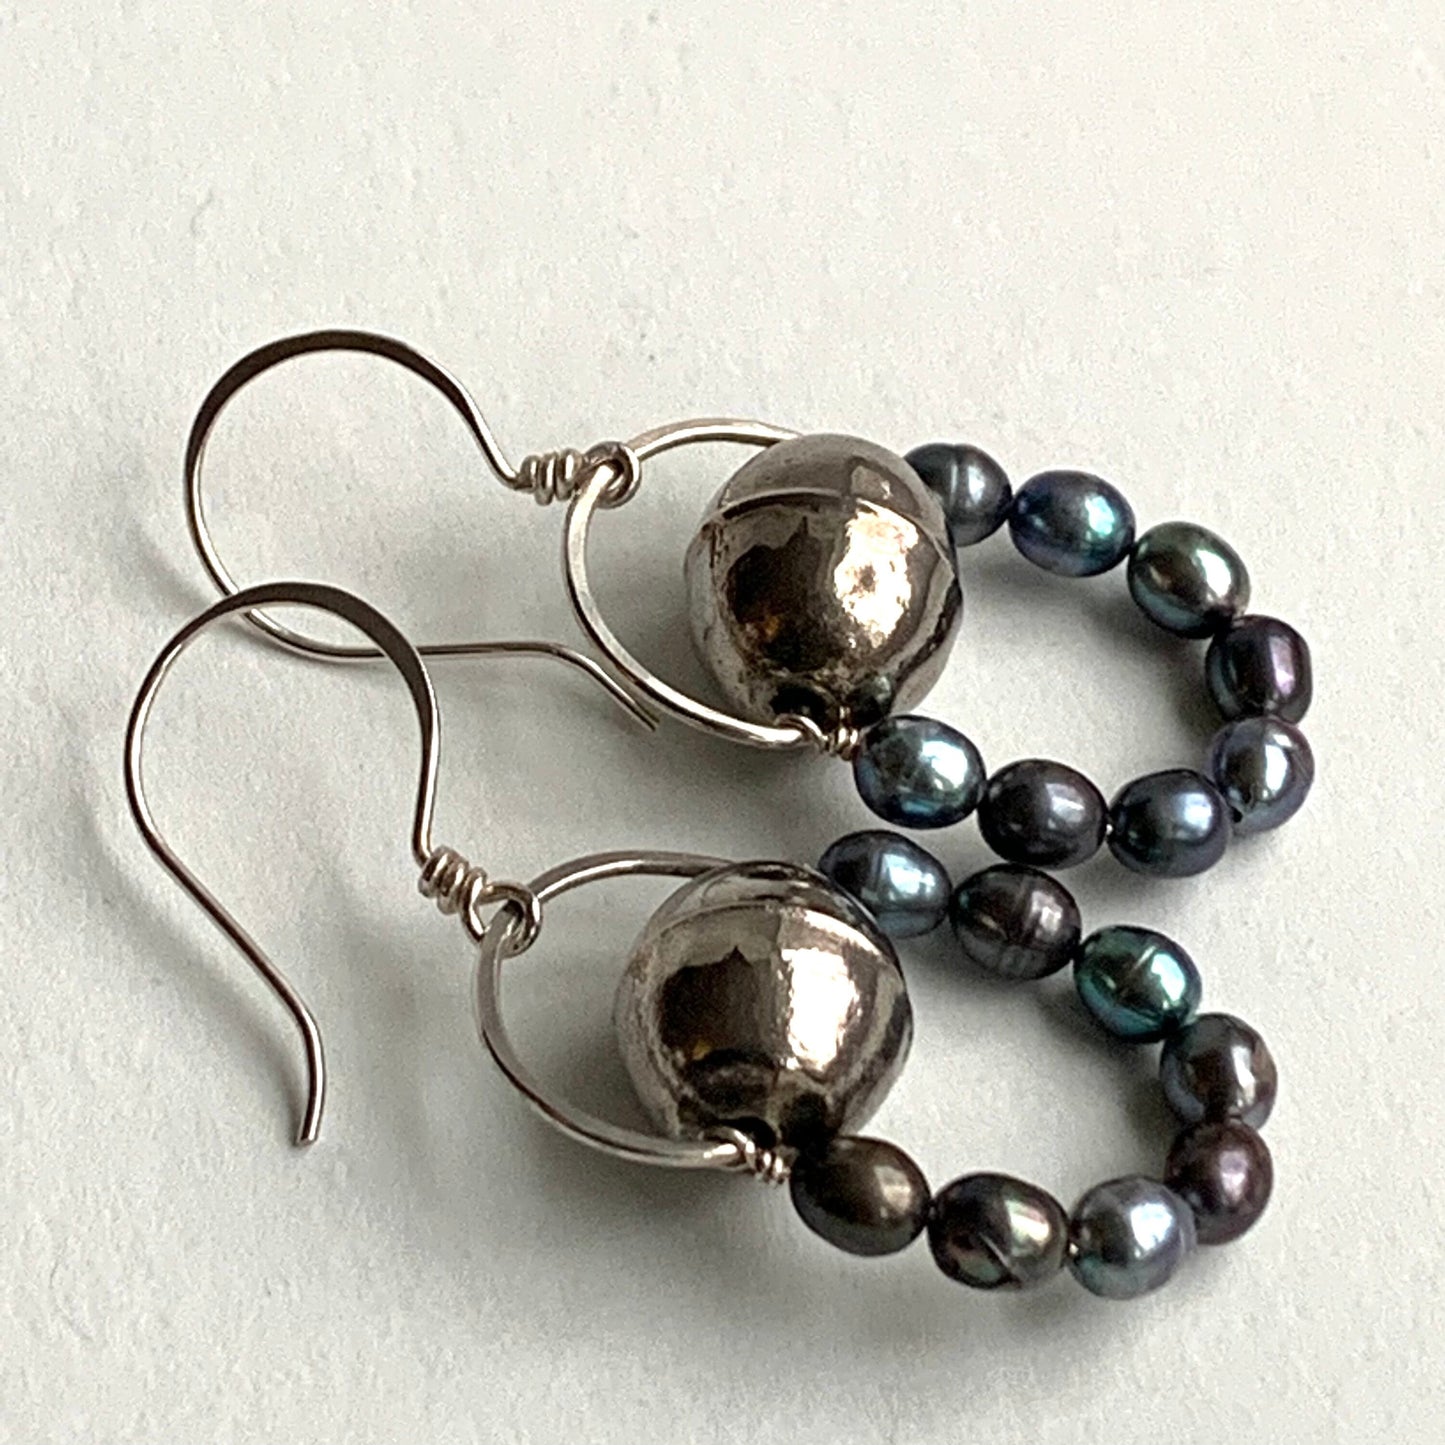 Freshwater pearl earrings - handmade beaded jewelry - pearl and sterling earrings for women - gifts for mom - natural, earthy style